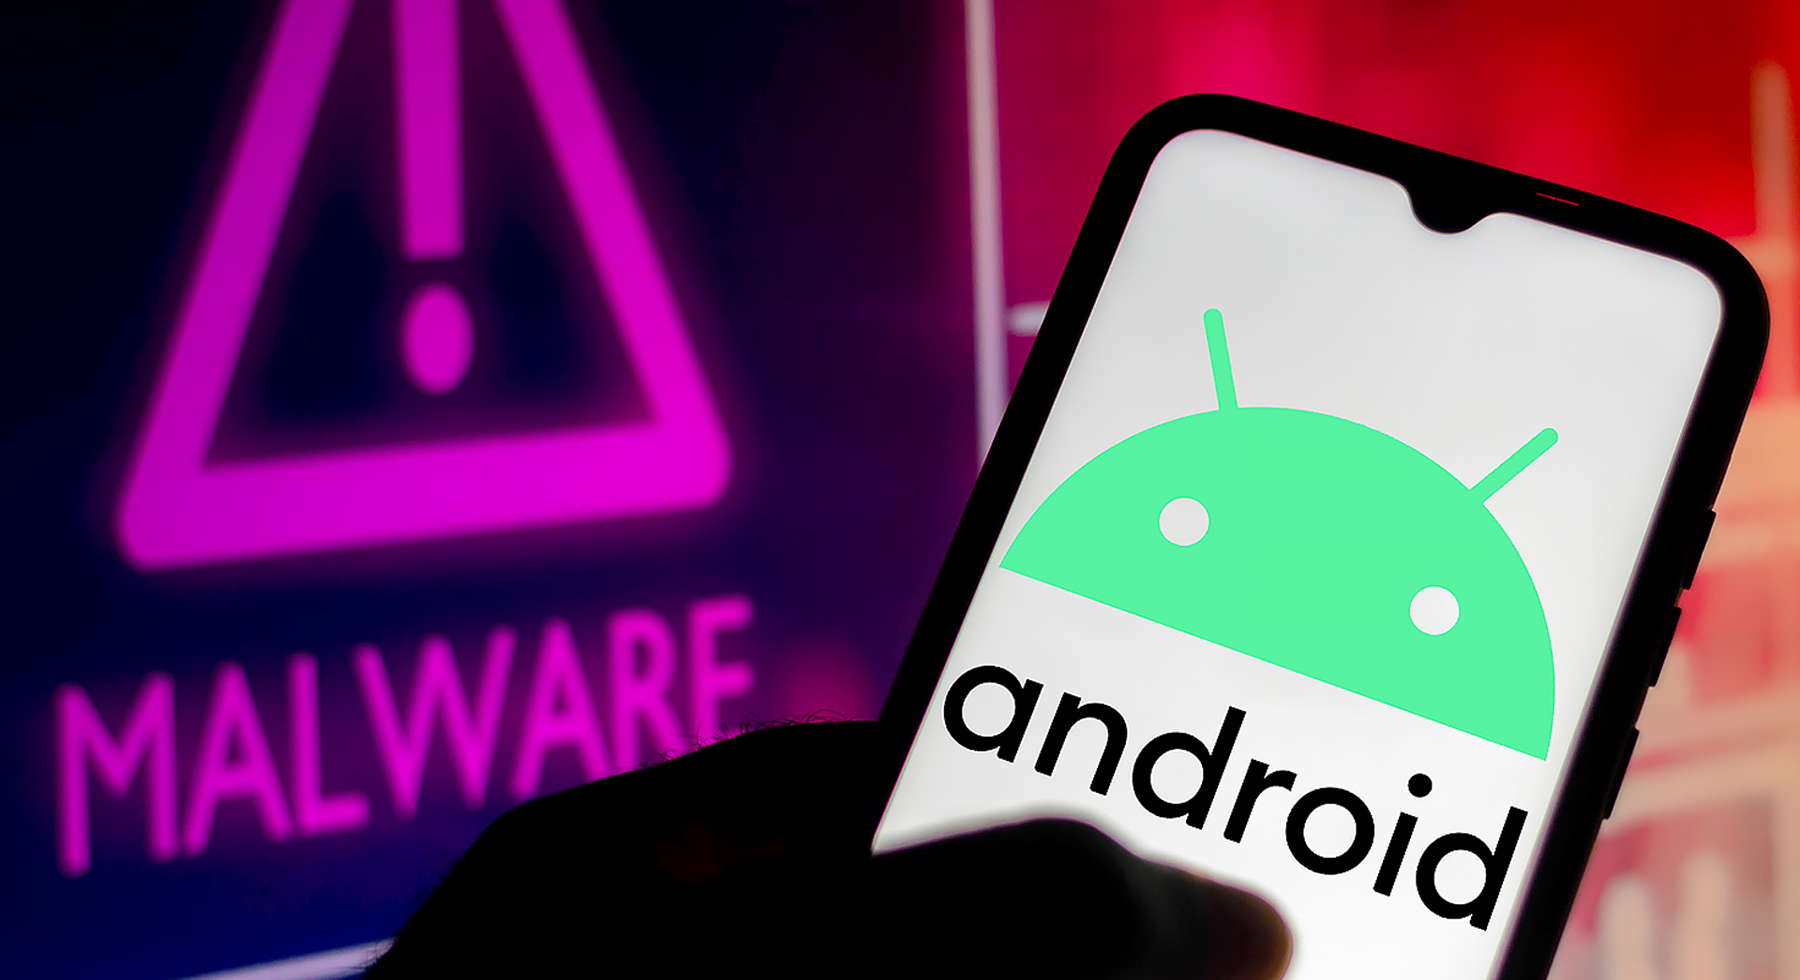 Do you have any of these Android apps